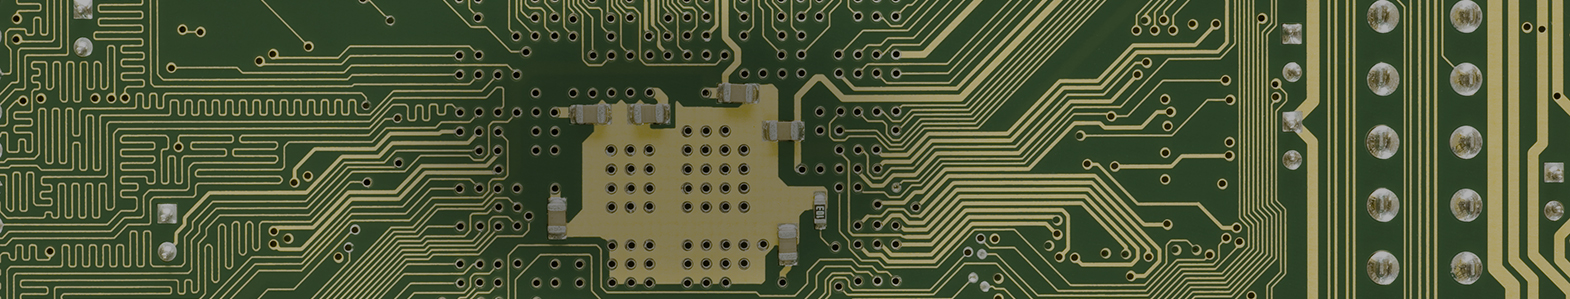 Printed circuit board inspection